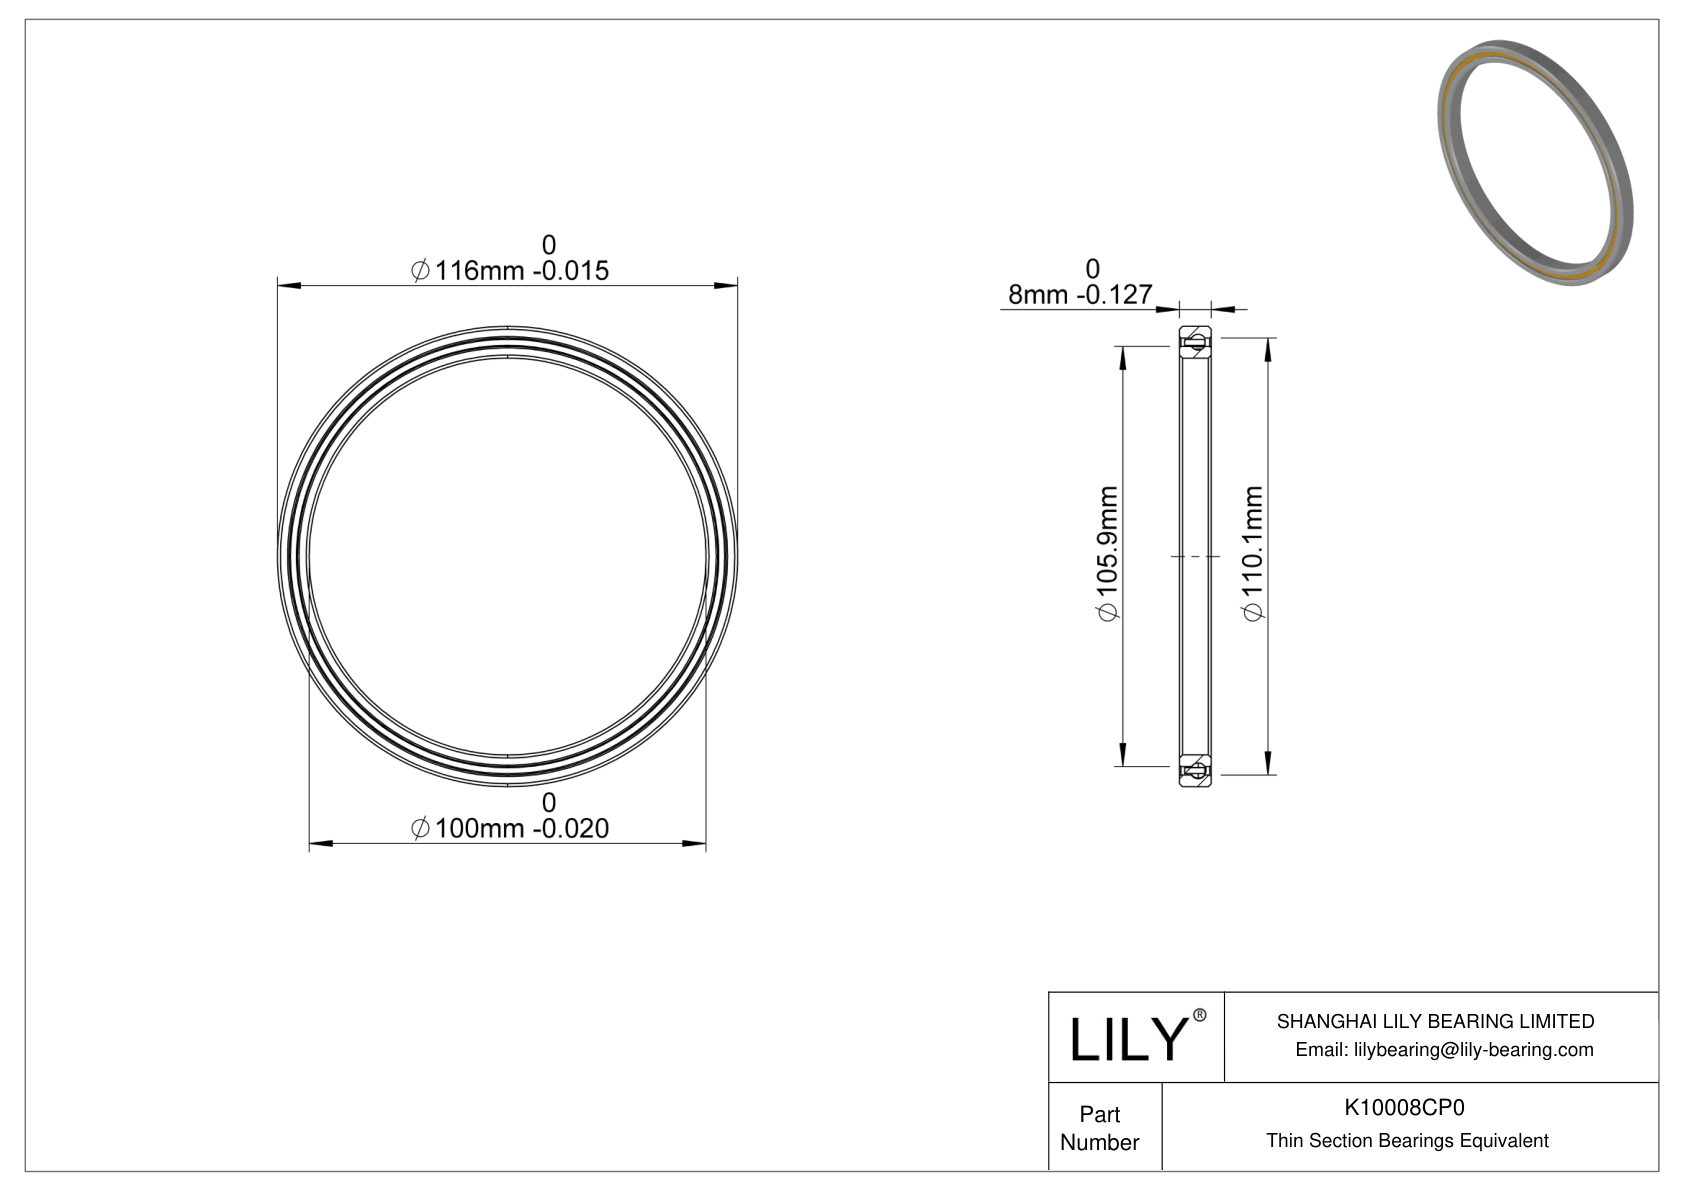 K10008CP0 Constant Section (CS) Bearings cad drawing